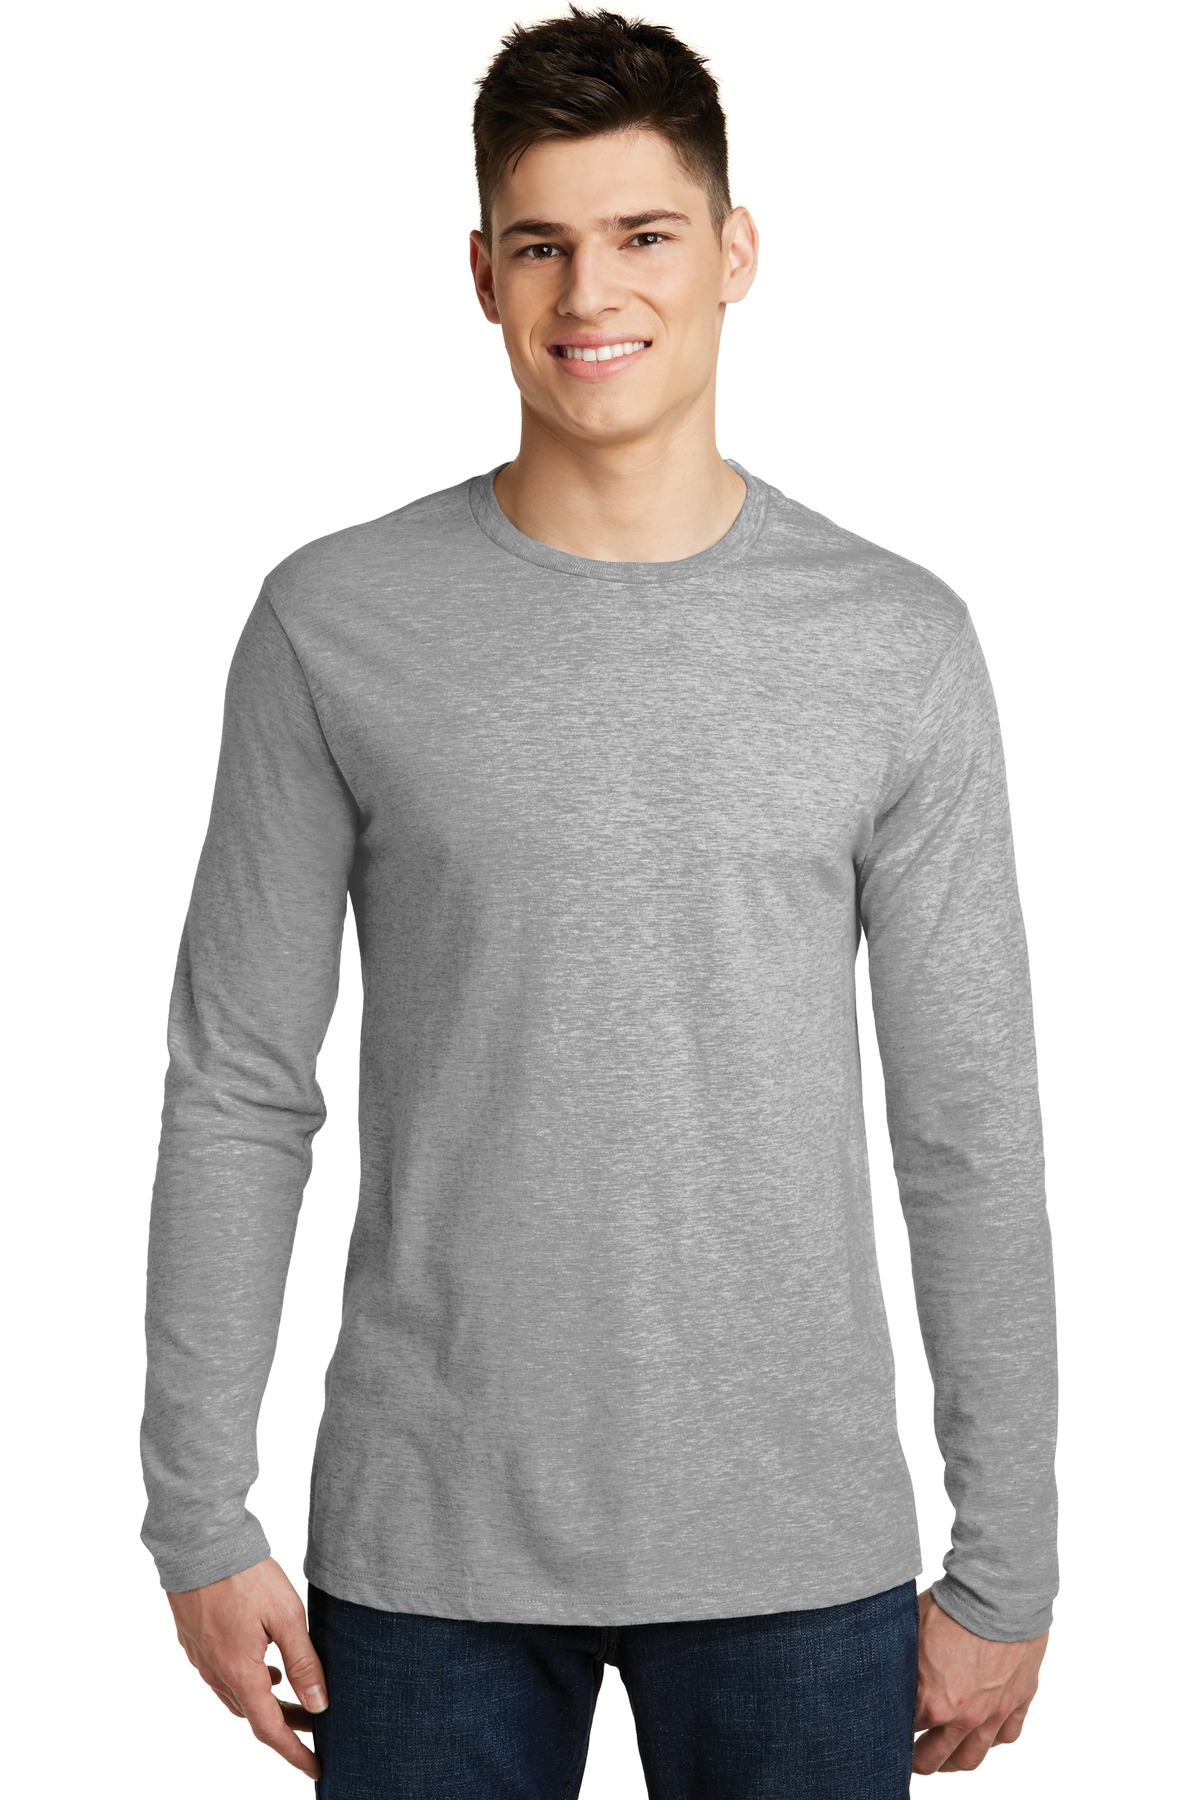 District Hospitality T-Shirts ® Very Important Tee® Long Sleeve.-District